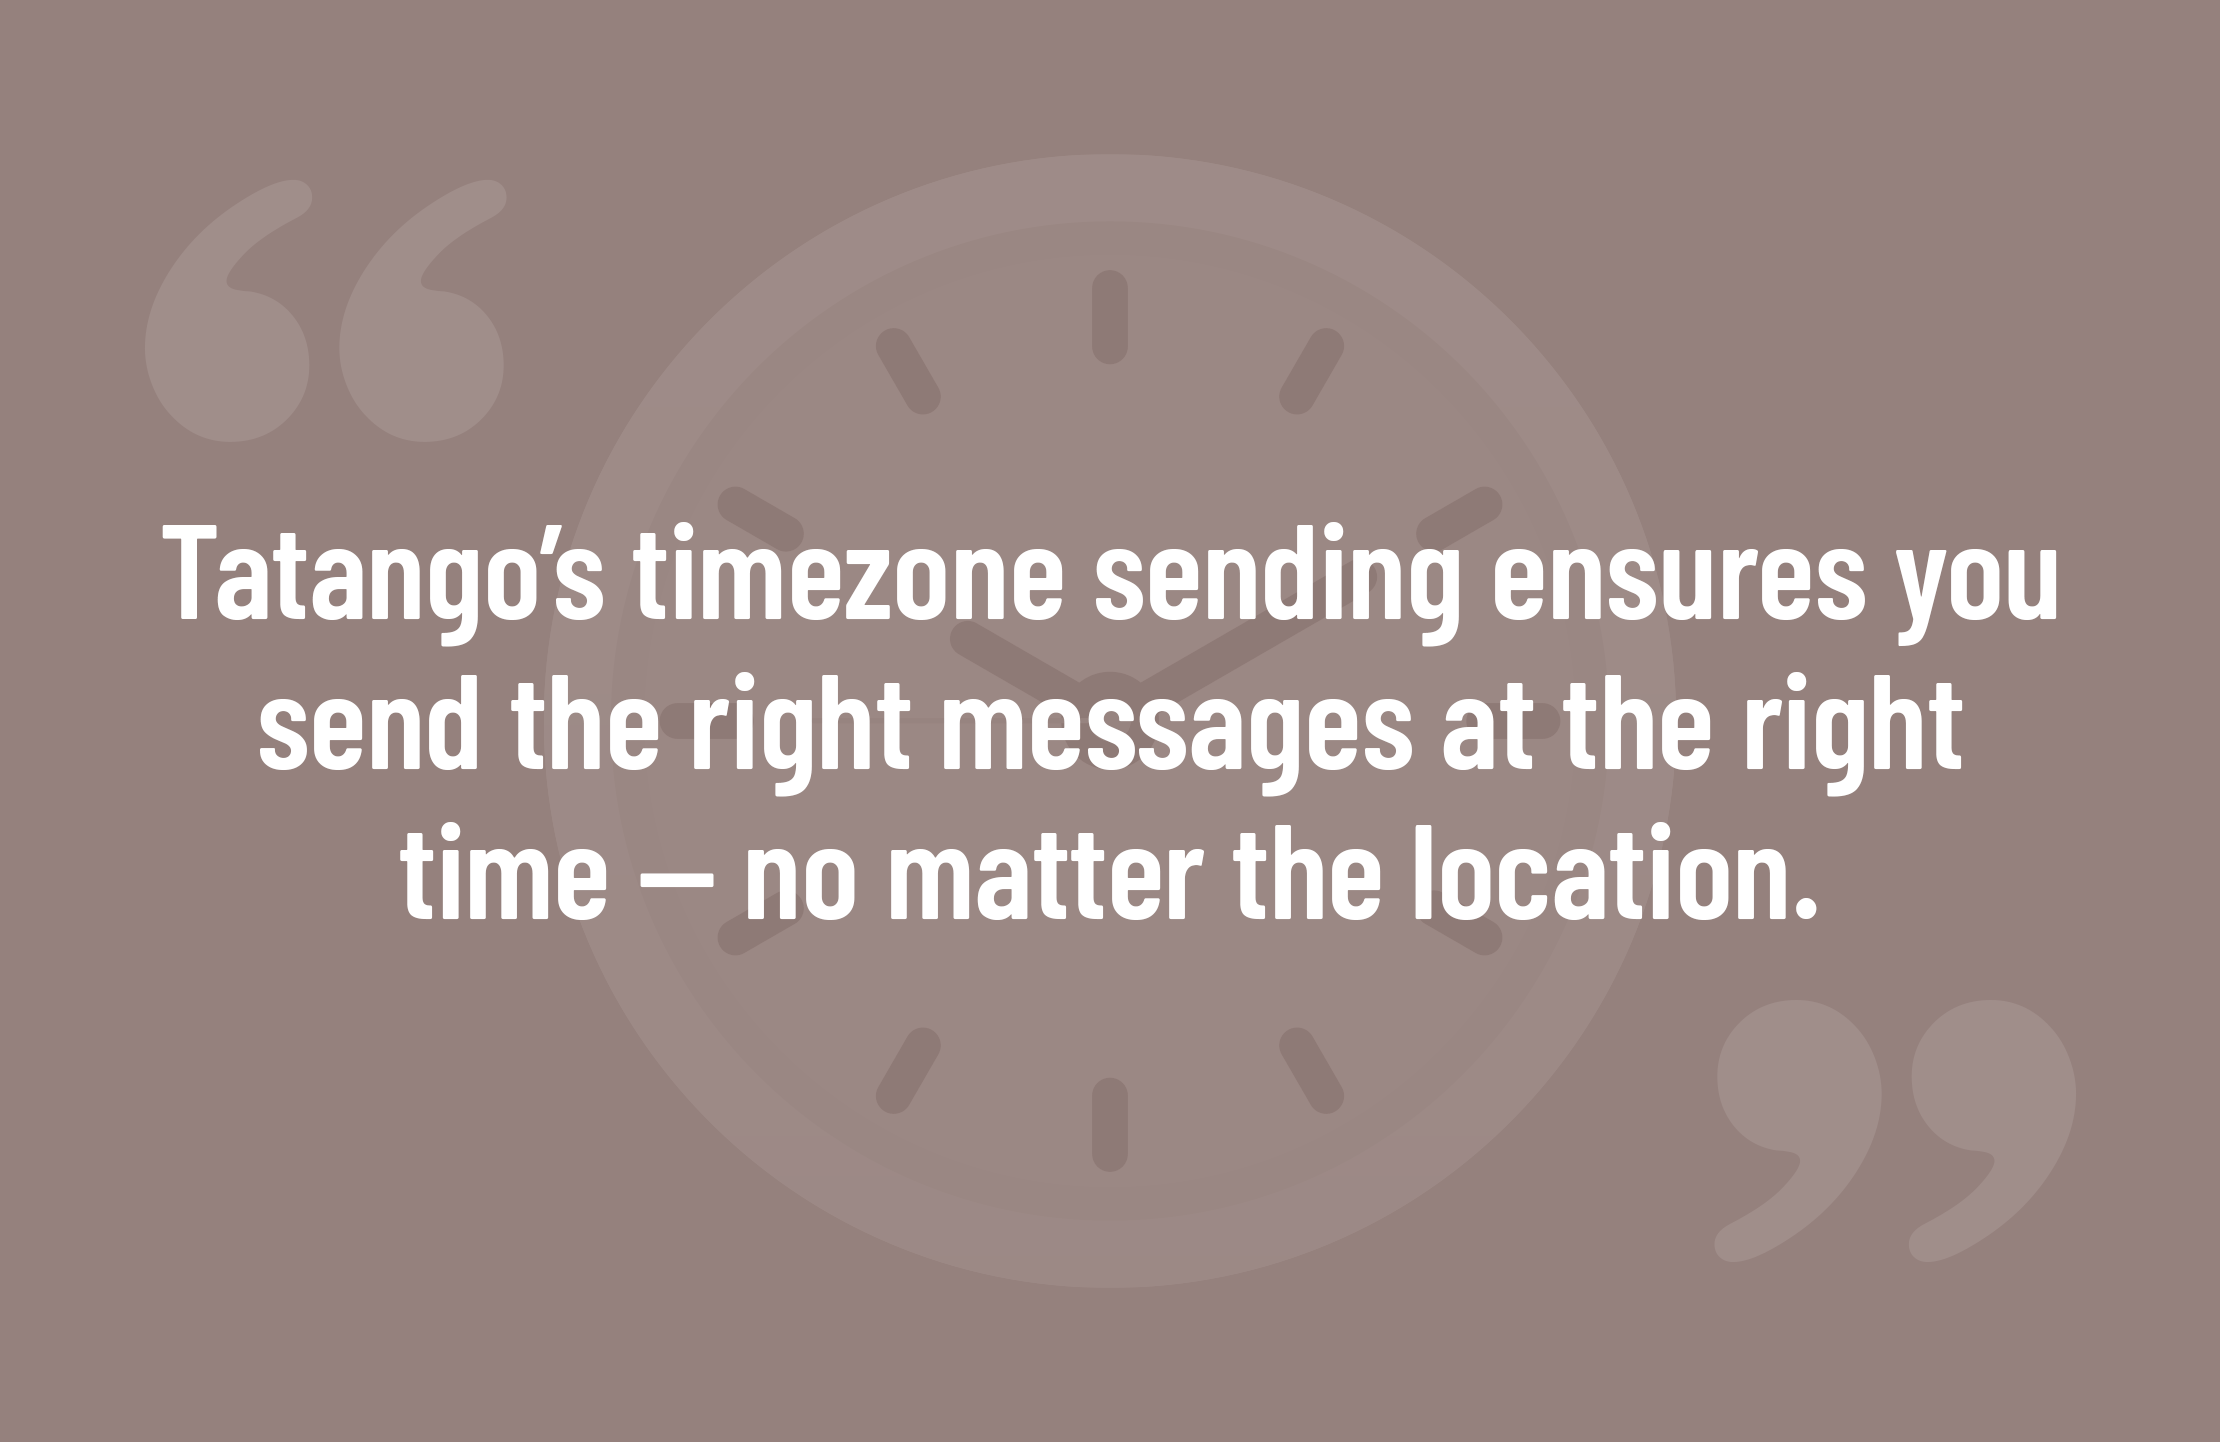 Tatango’s timezone sending ensures you send the right messages at the right time